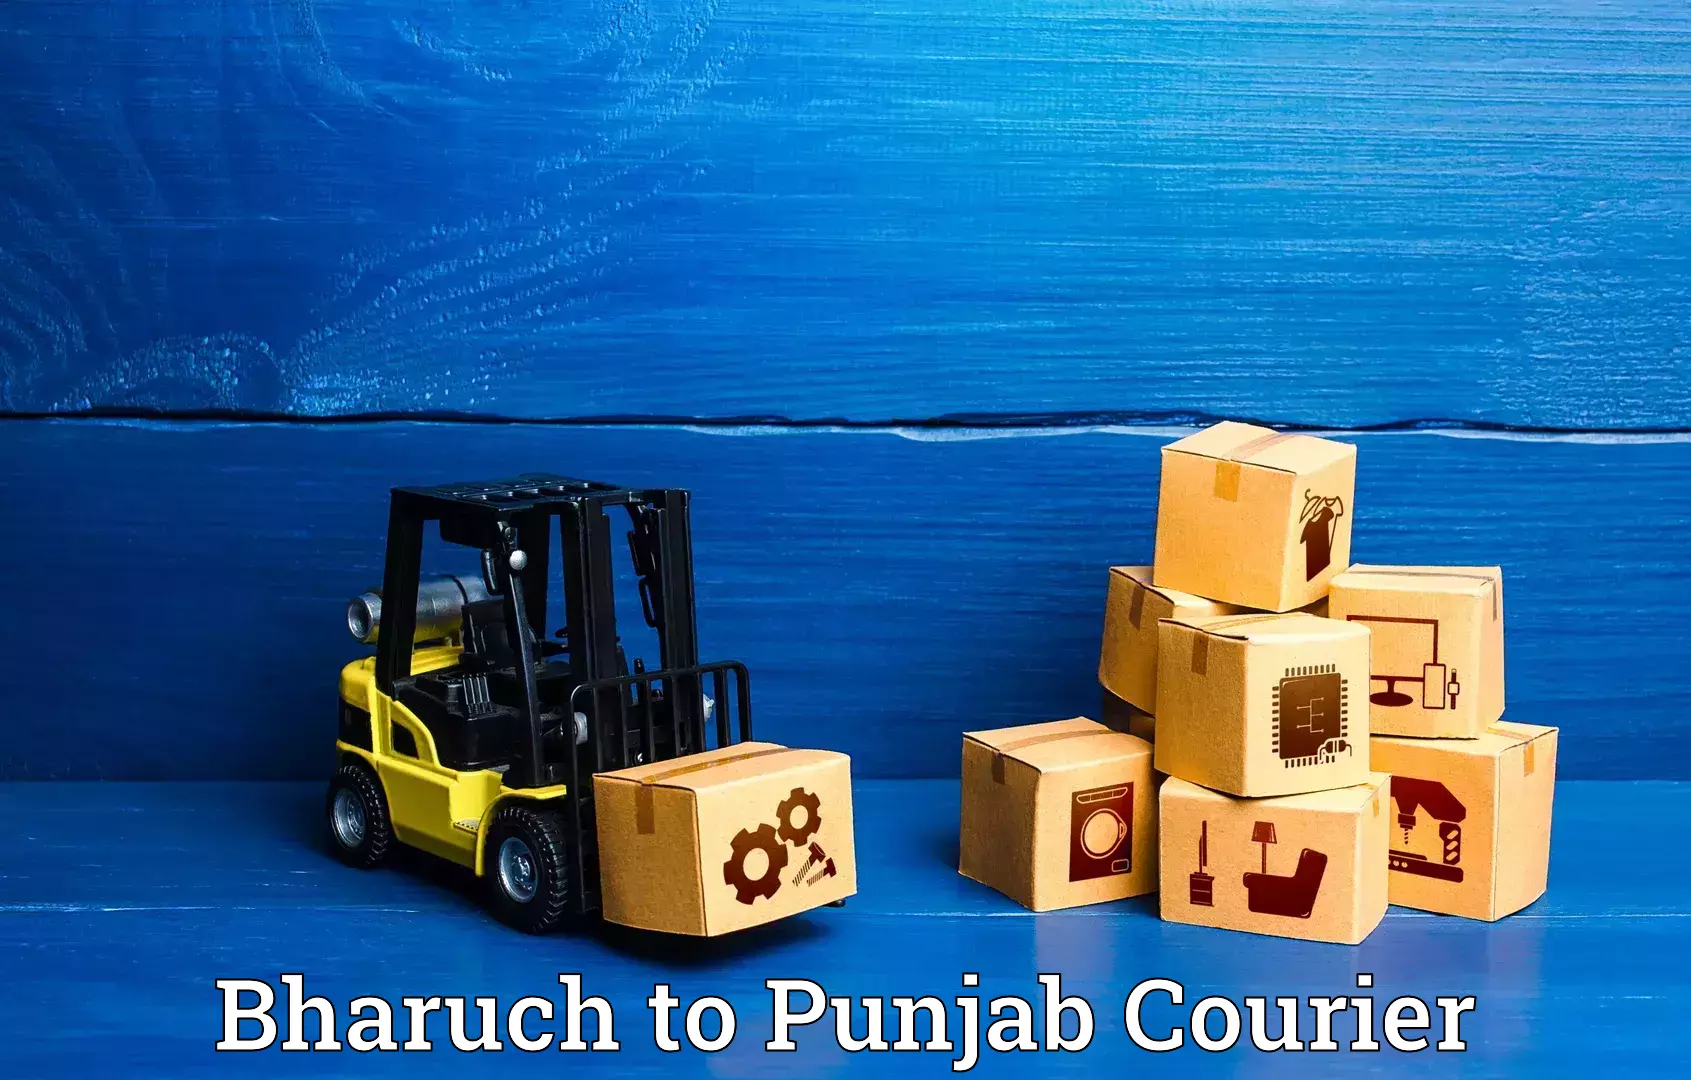 Luggage transport consultancy Bharuch to Mohali